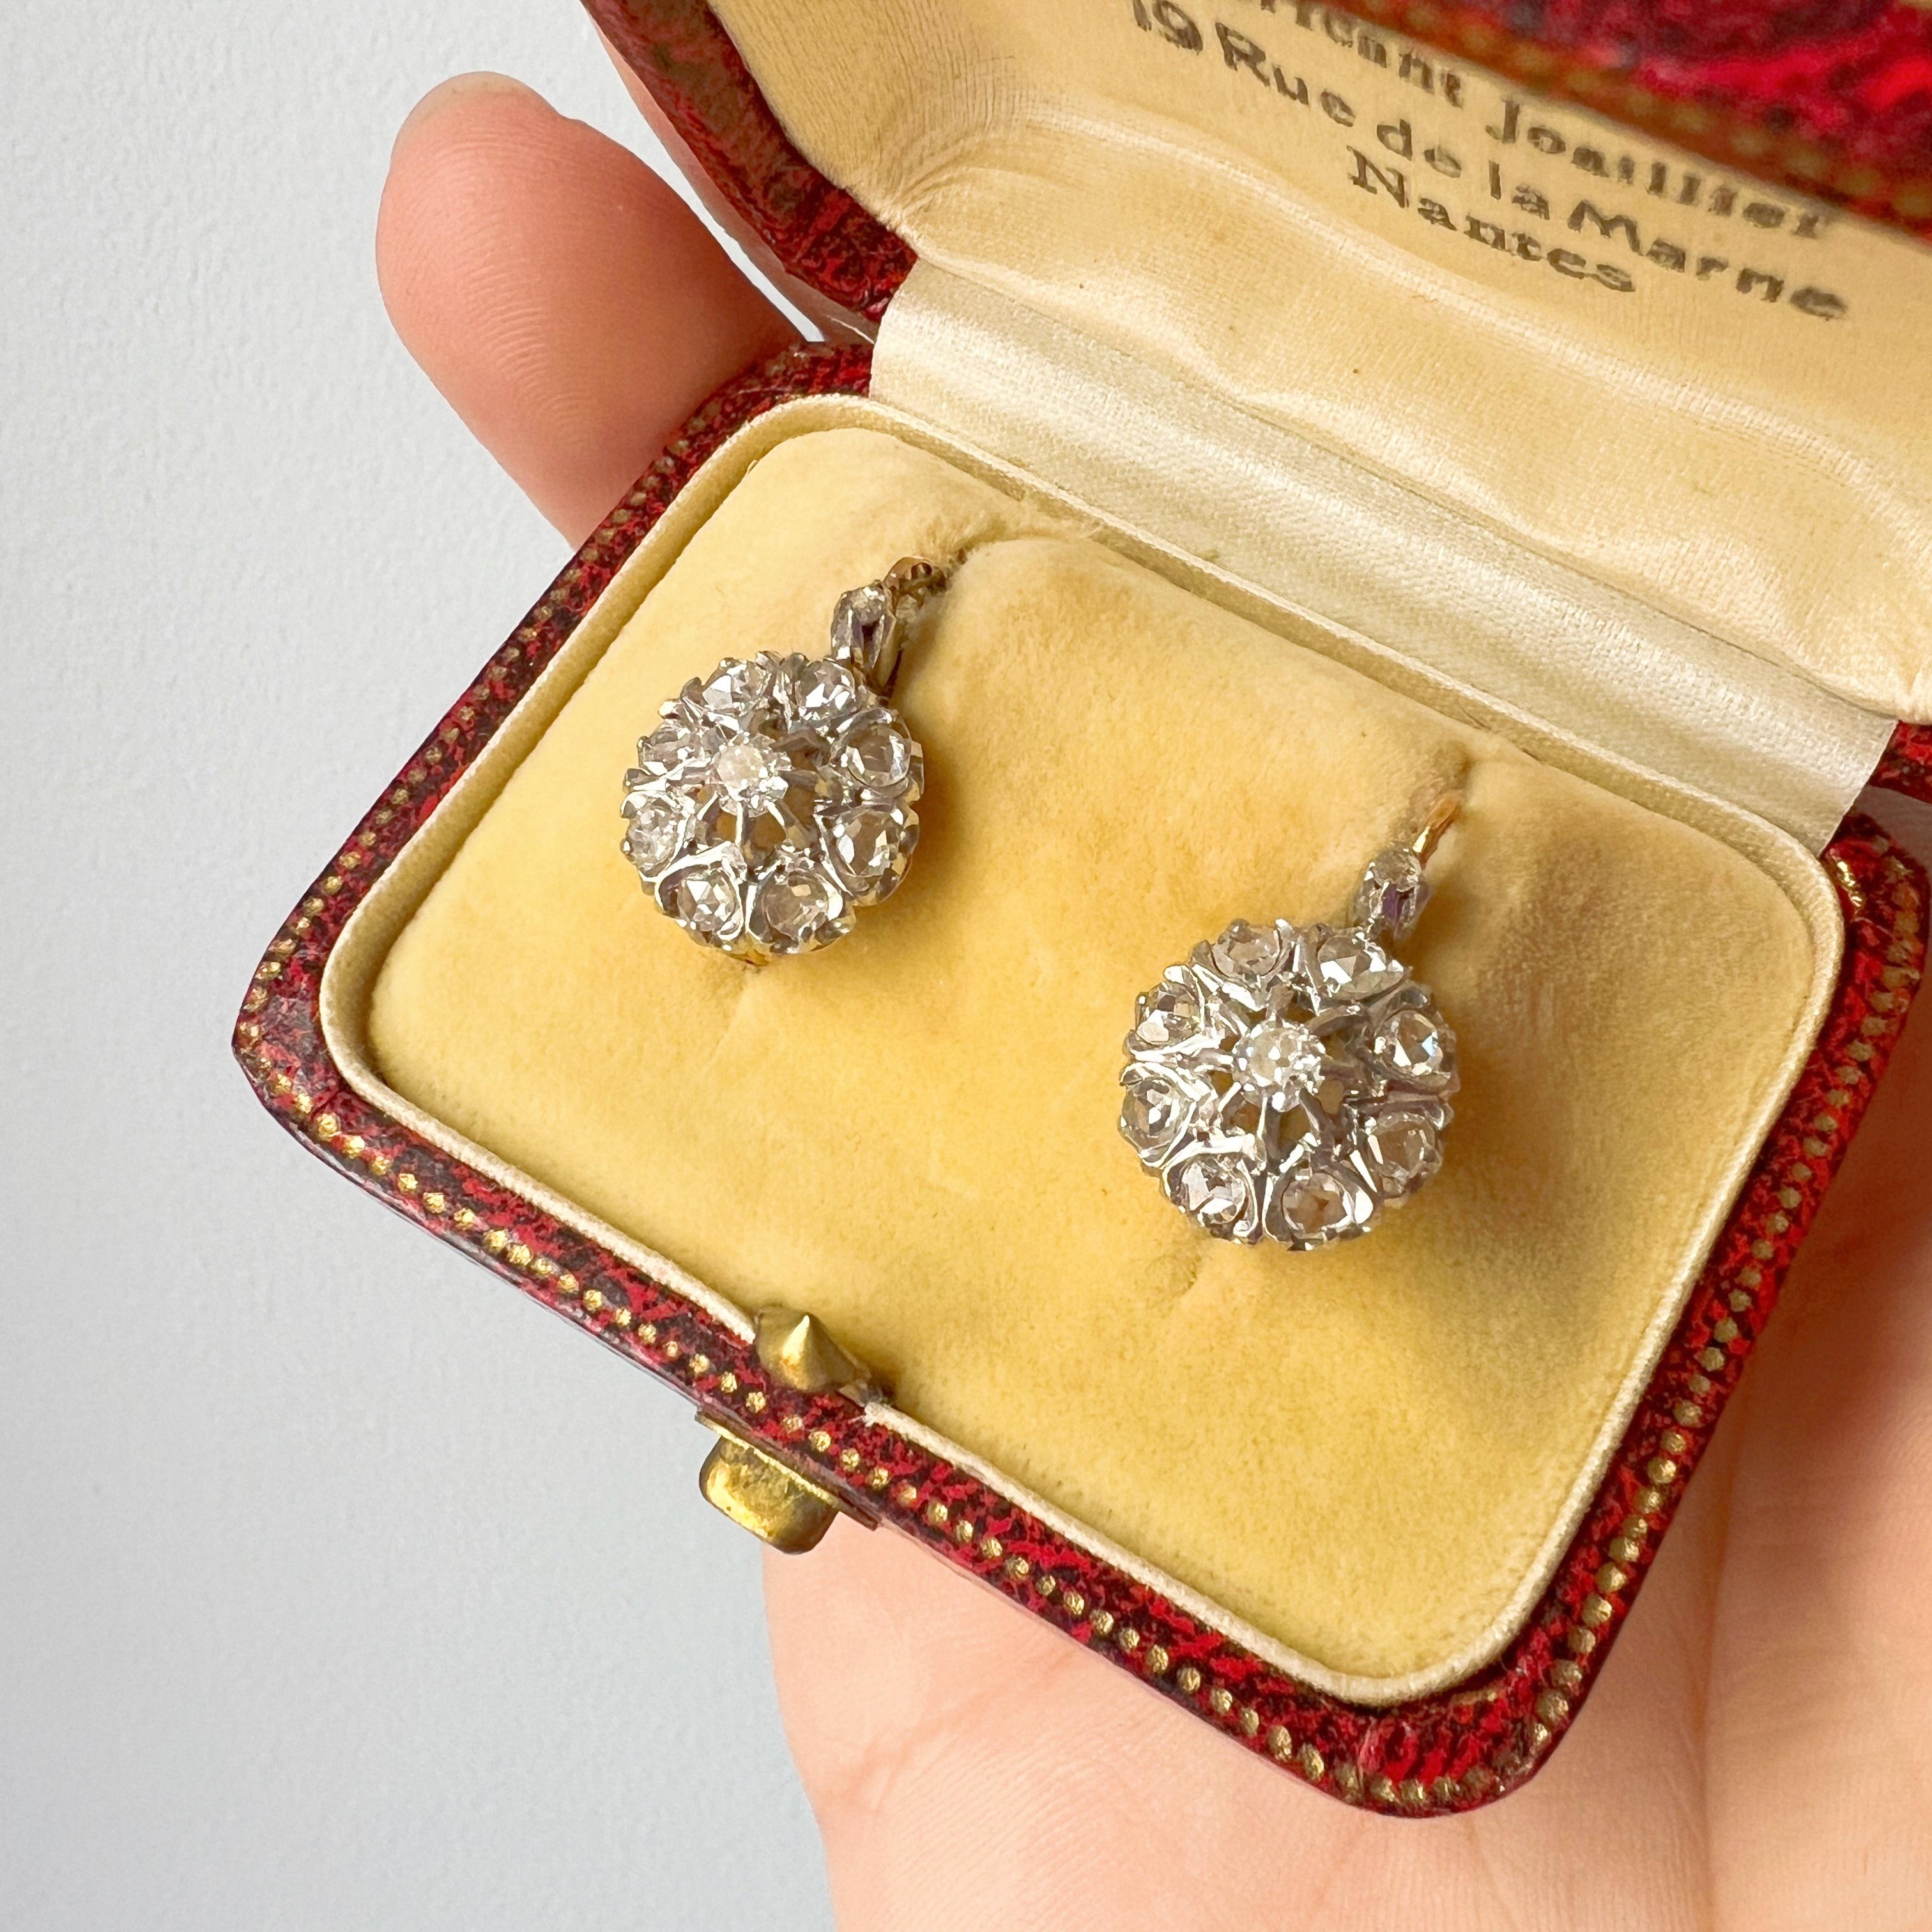 For sale a beautiful pair of French made, 19th century rose cut diamond earrings. 

On each side of the earrings, there are 8 rose diamonds cluster around a central round old mine cut diamond plus a smaller rose cut on the top, to create a fiery